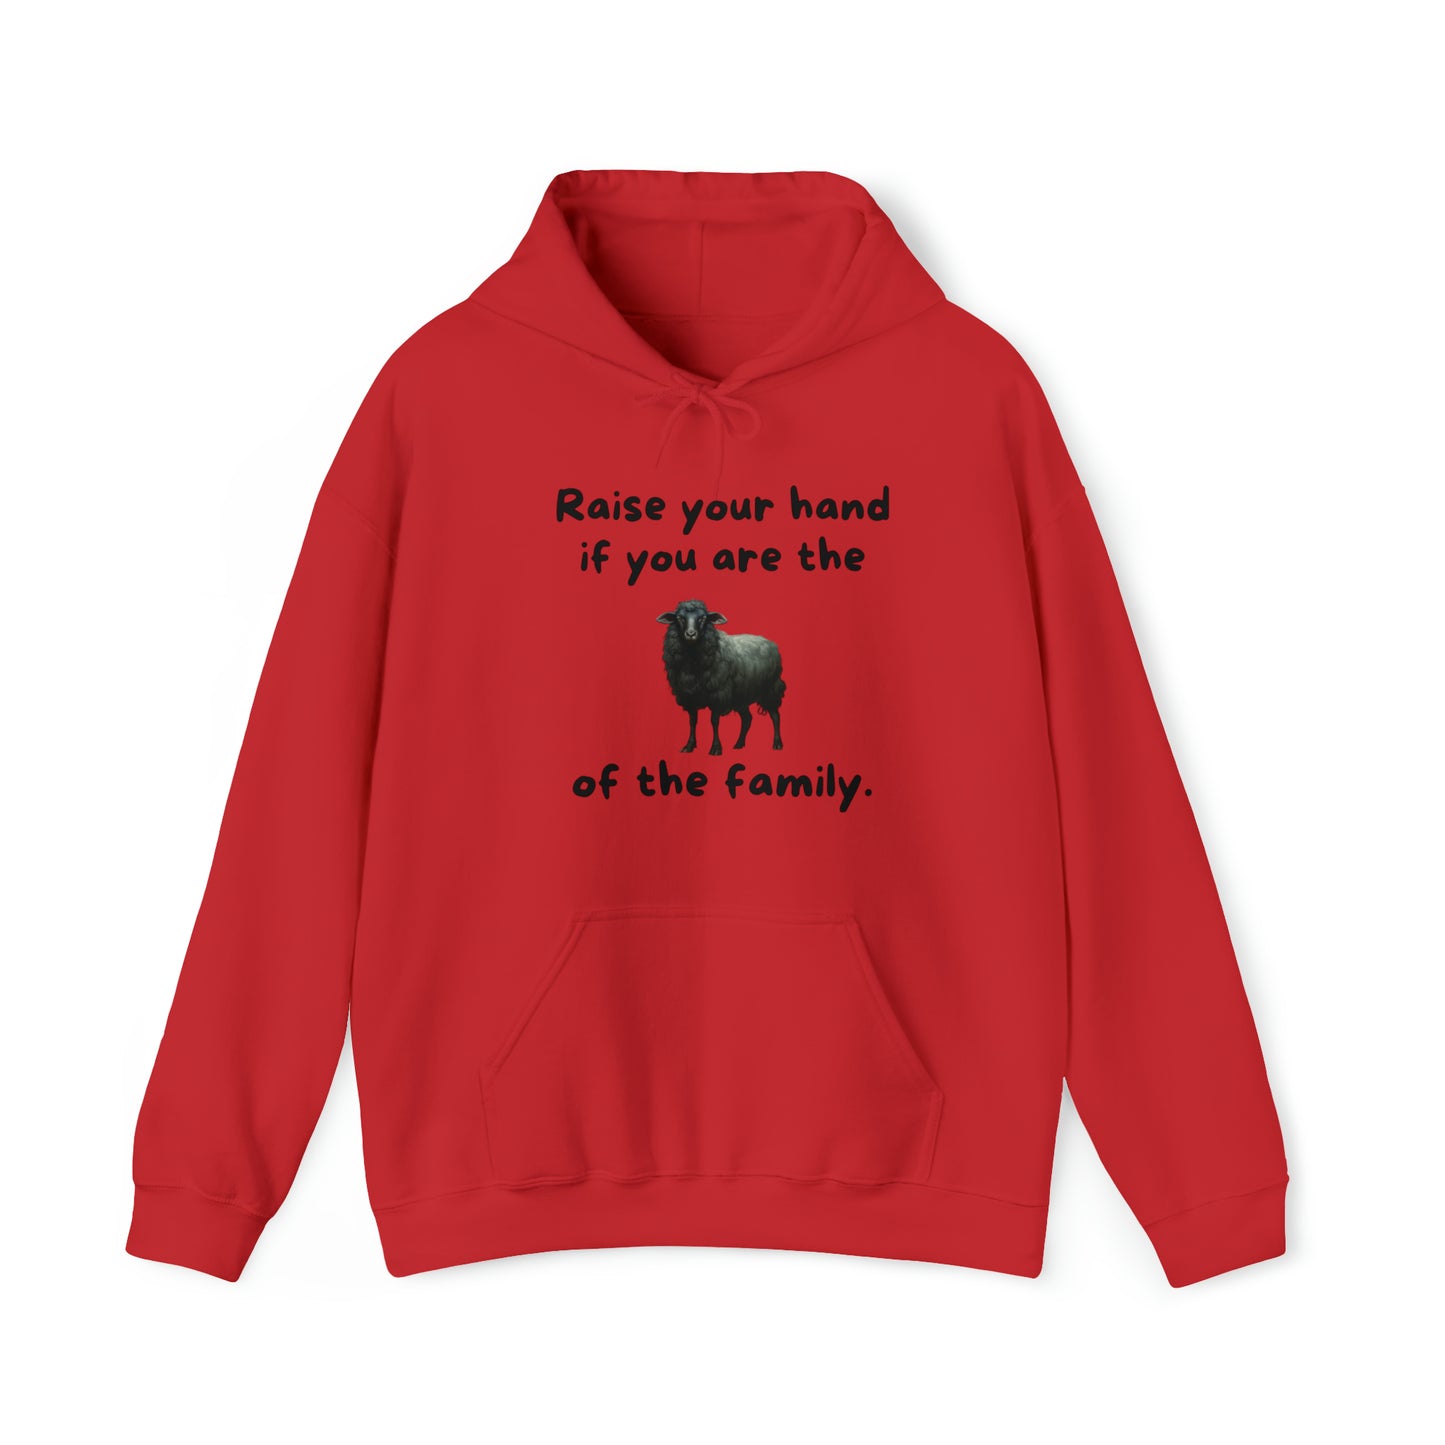 Raise Your Hand If You Are the Balck Sheep of the Family Unisex Hooded Sweatshirt